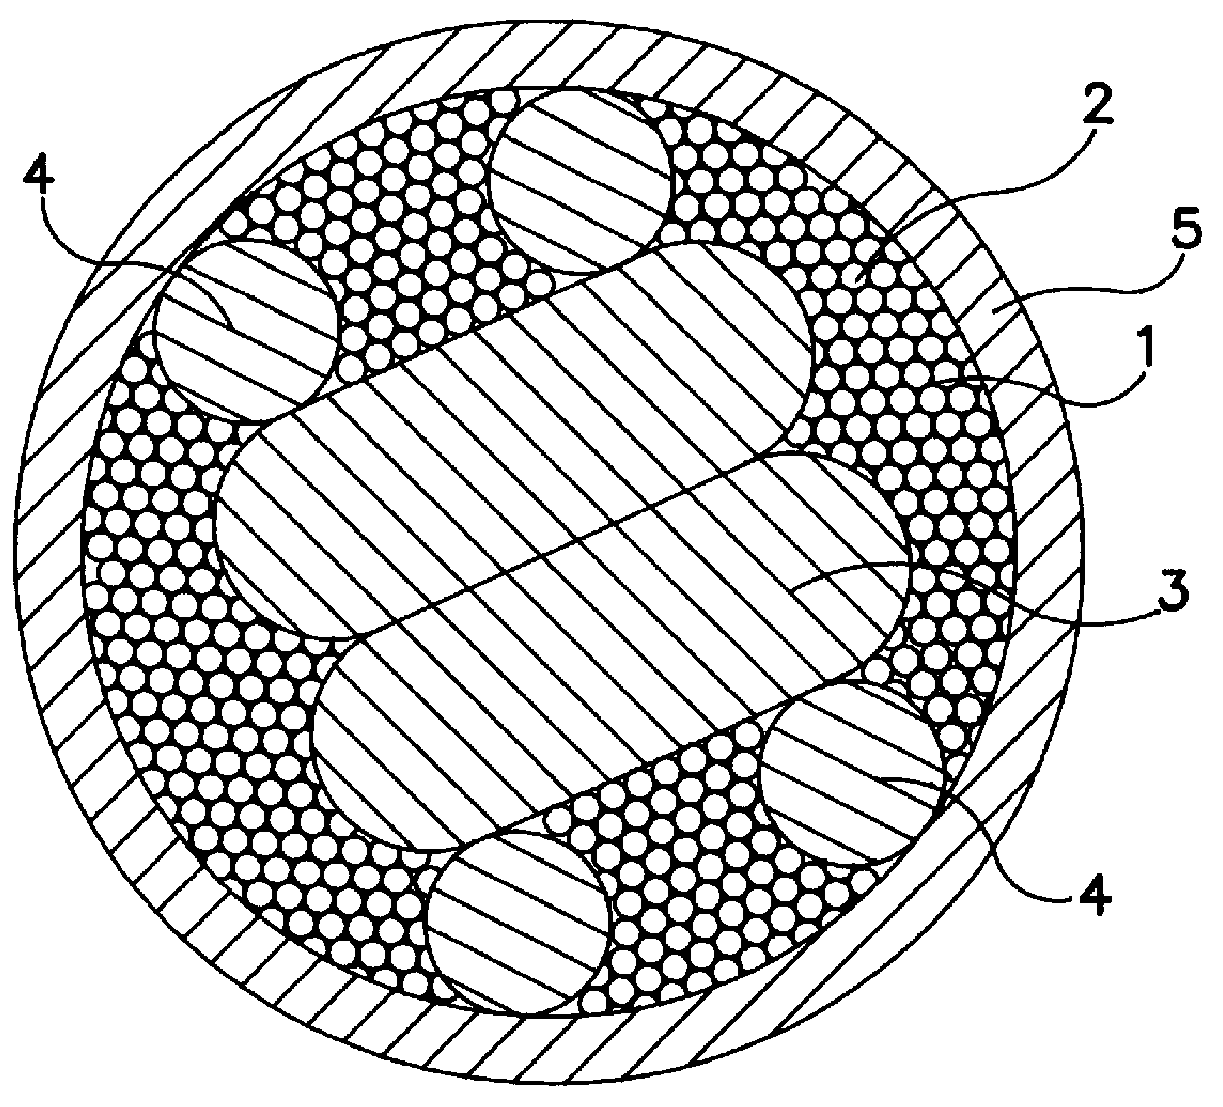 Composite synthetic string for a tennis racket